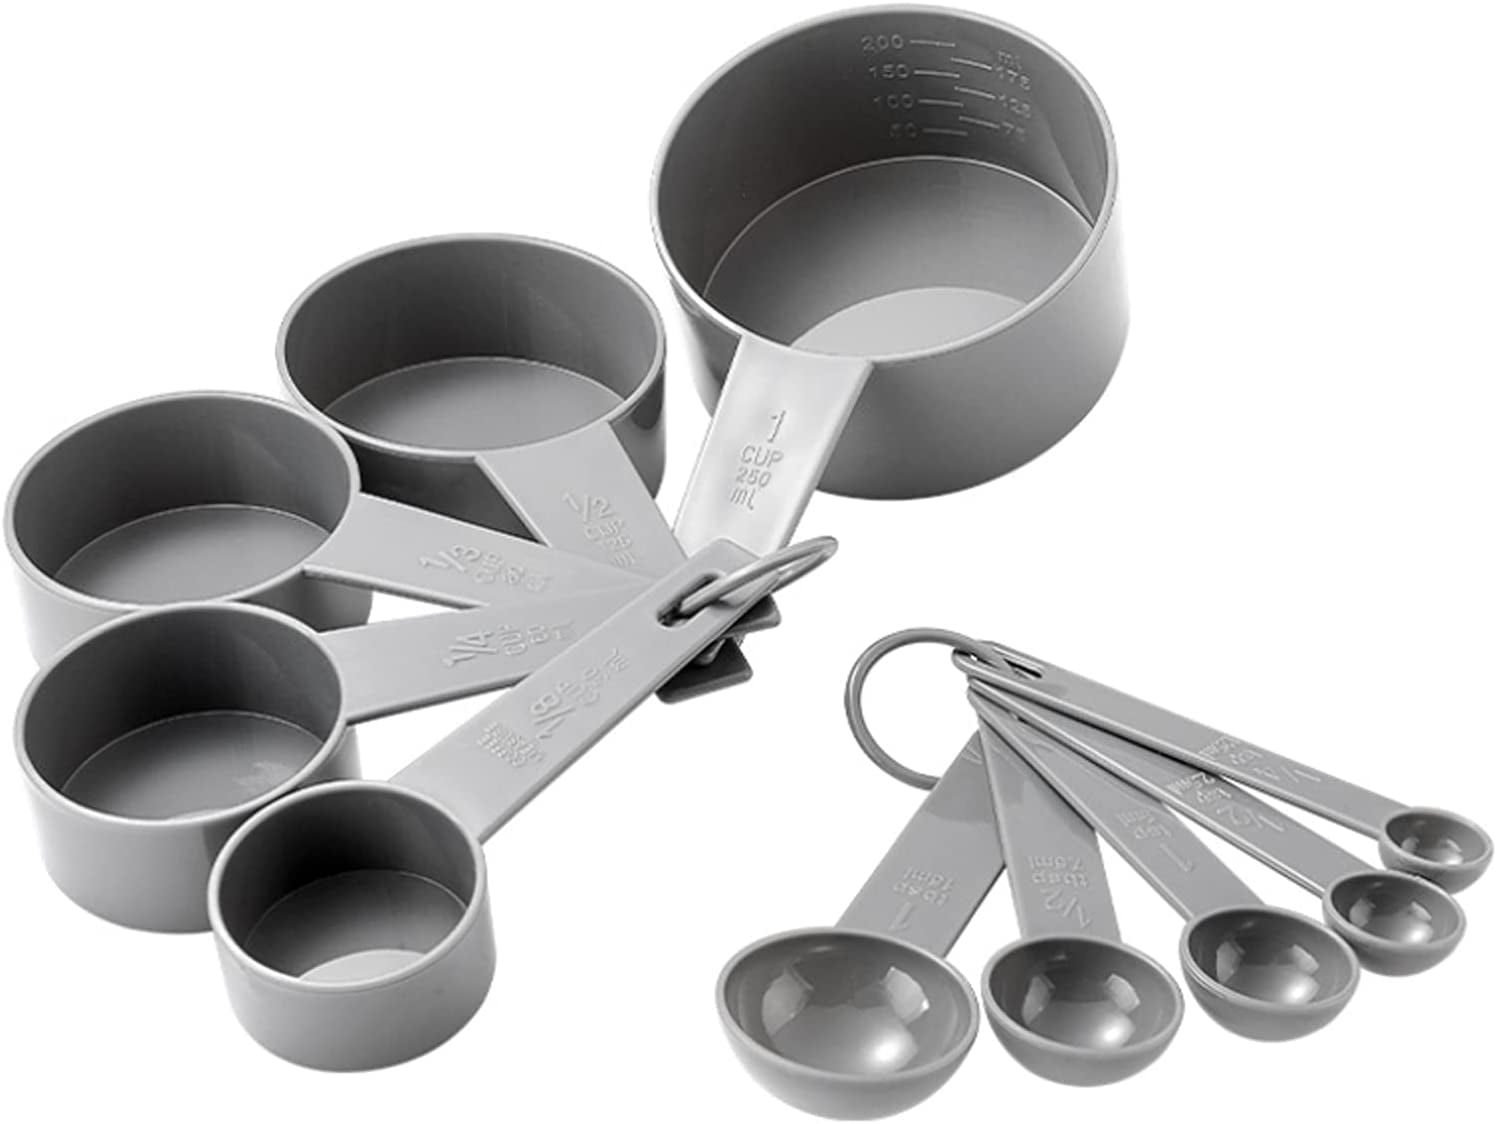  LIFETOWE Stainless Steel Measuring Cups and Spoons Set of 15 -  Includes 7 Nesting Metal Measuring Cups, 8 Magnetic Measuring Spoons set -  Ideal Kitchen Gadgets for Cooking and Baking Needs: Home & Kitchen